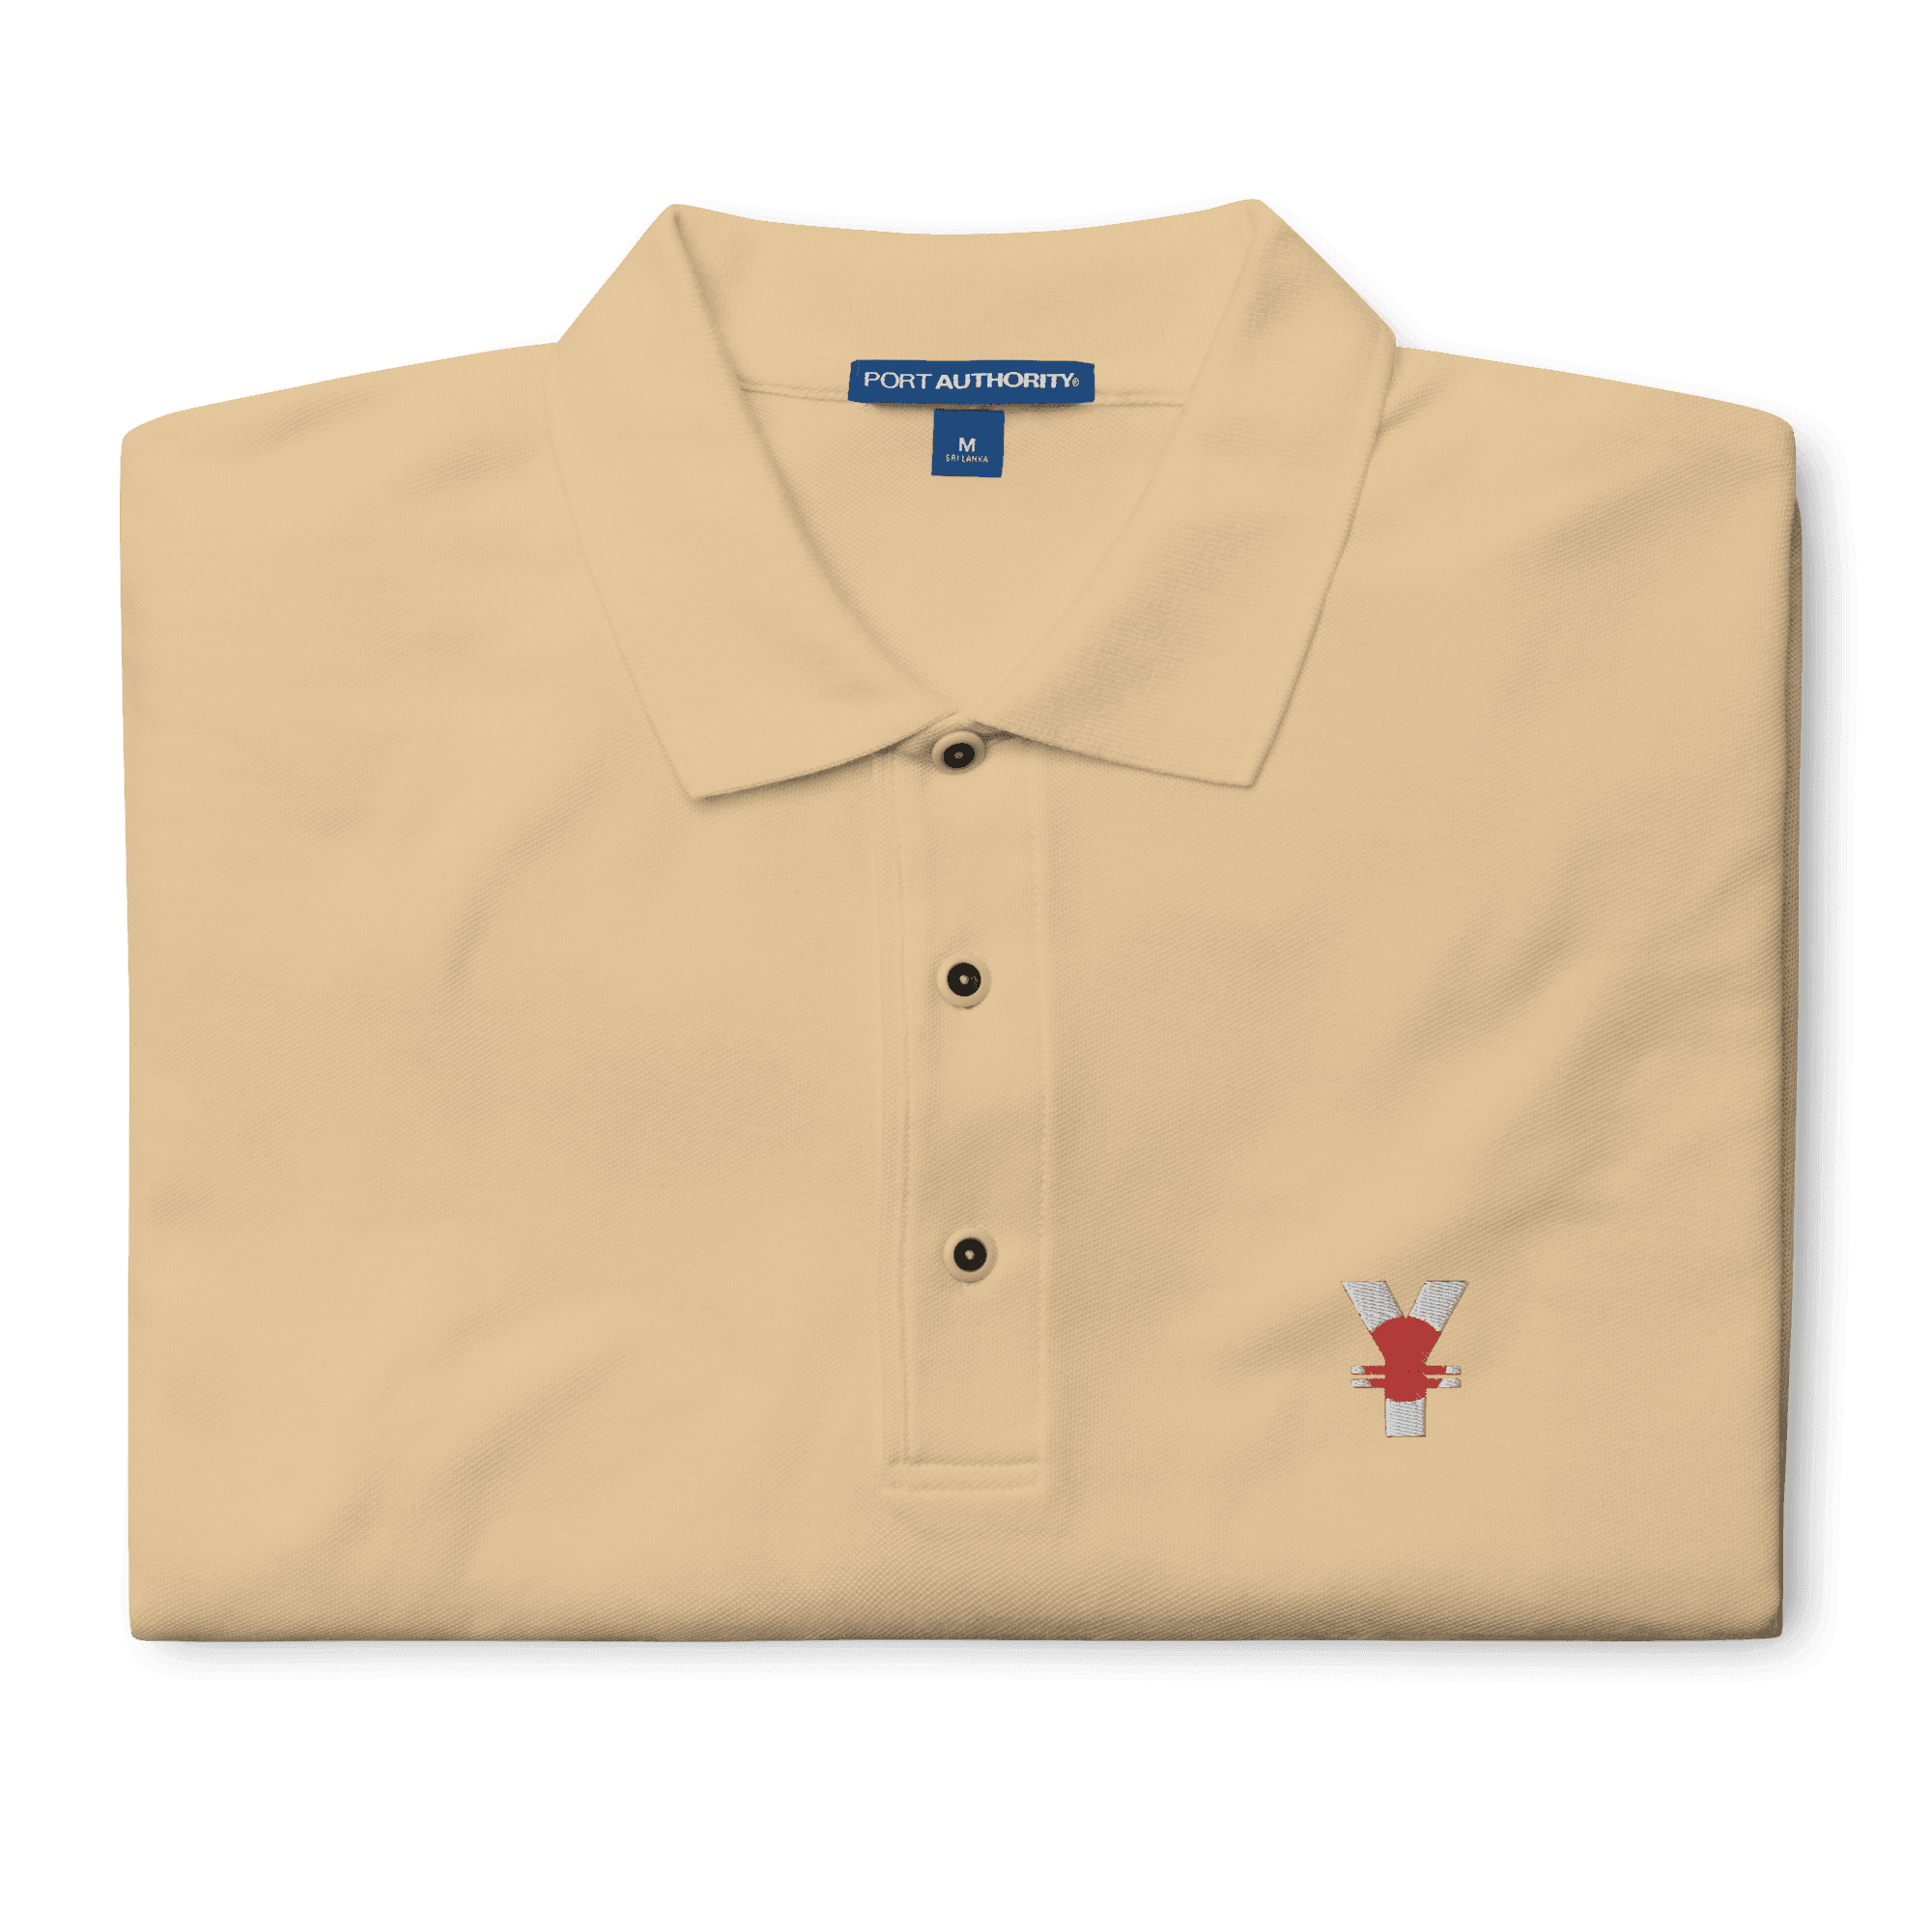 Chinese Yen Polo Shirt - InvestmenTees